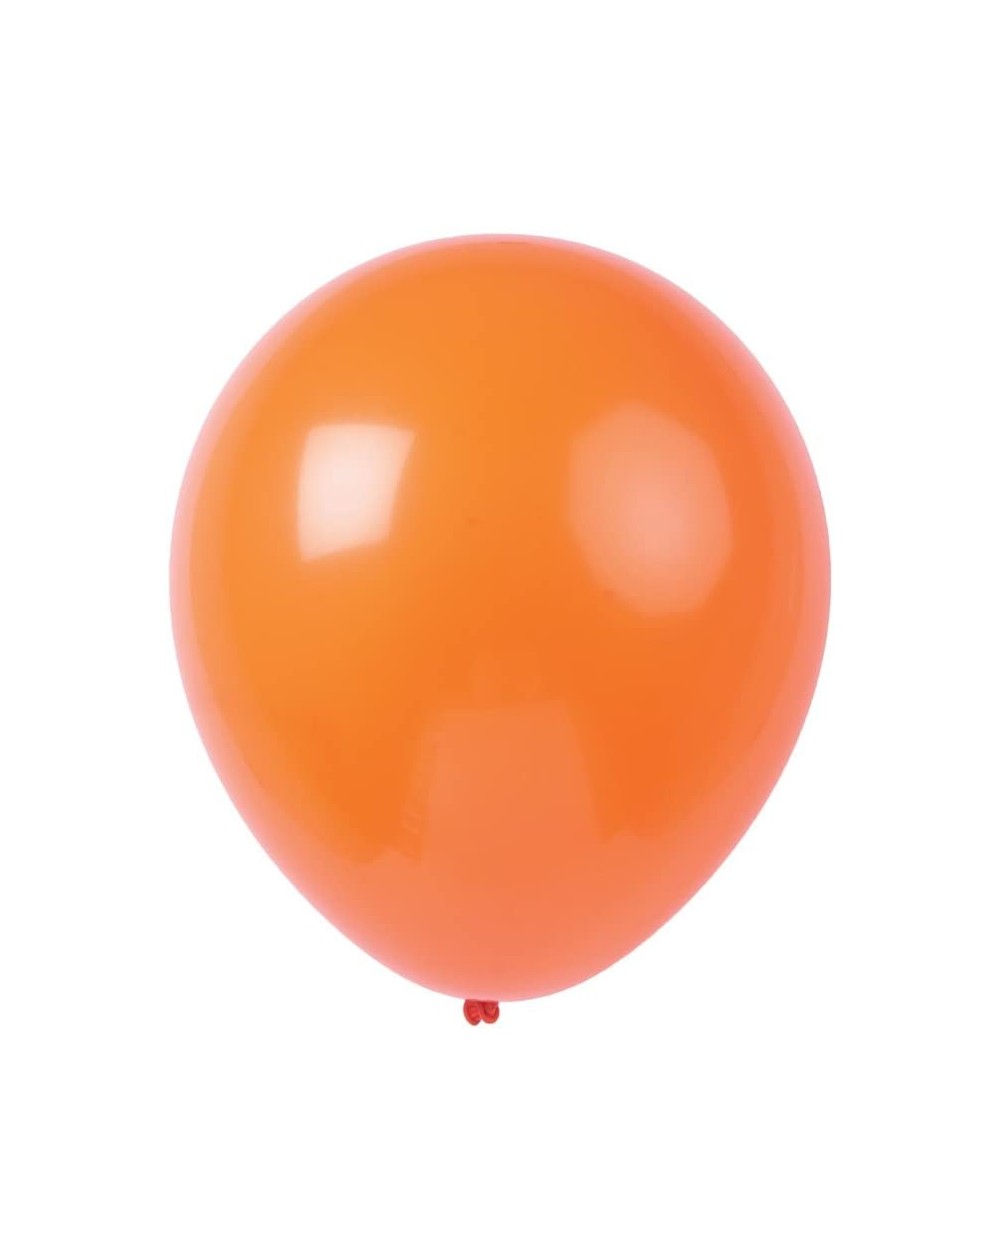 Balloons Party Supplies- 12 Inches Solid Latex Balloons- 50 Pack- Orange - Orange - C312FHSA8DJ $12.91